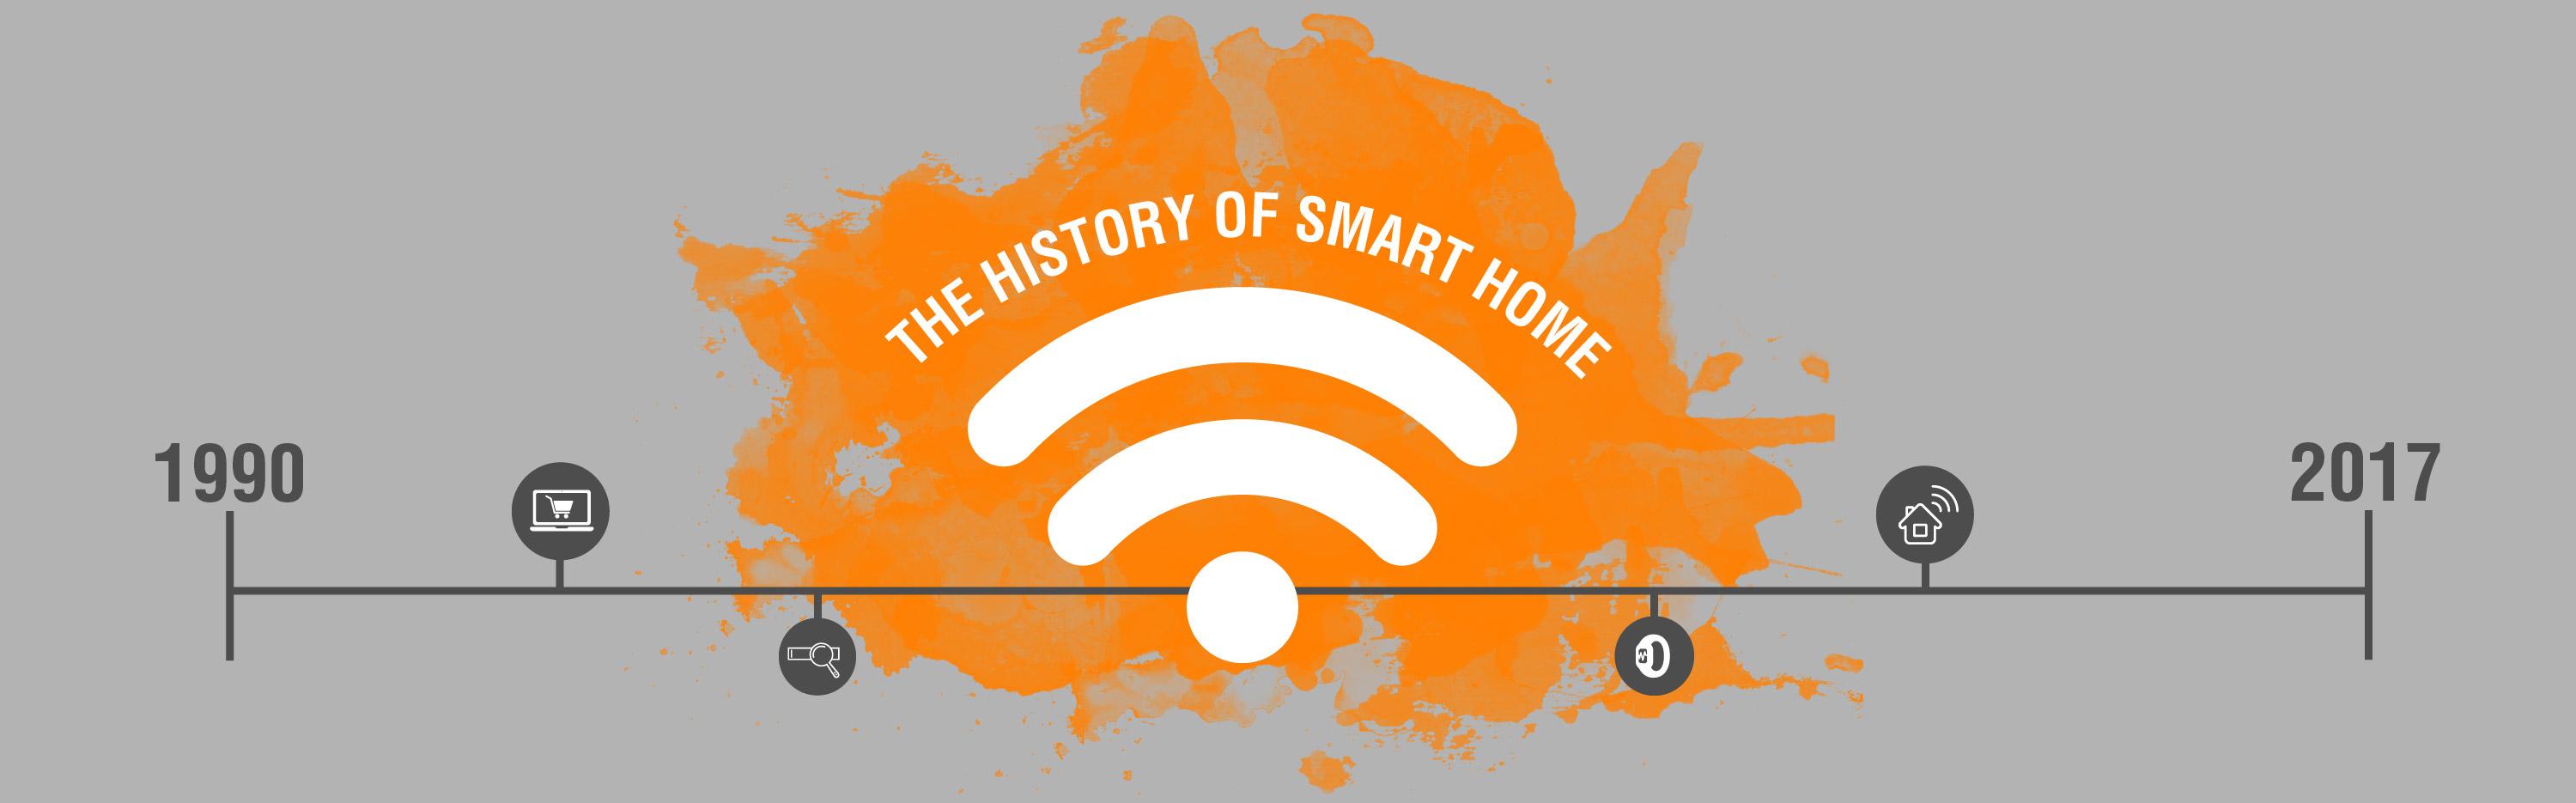 The History of Smart Home